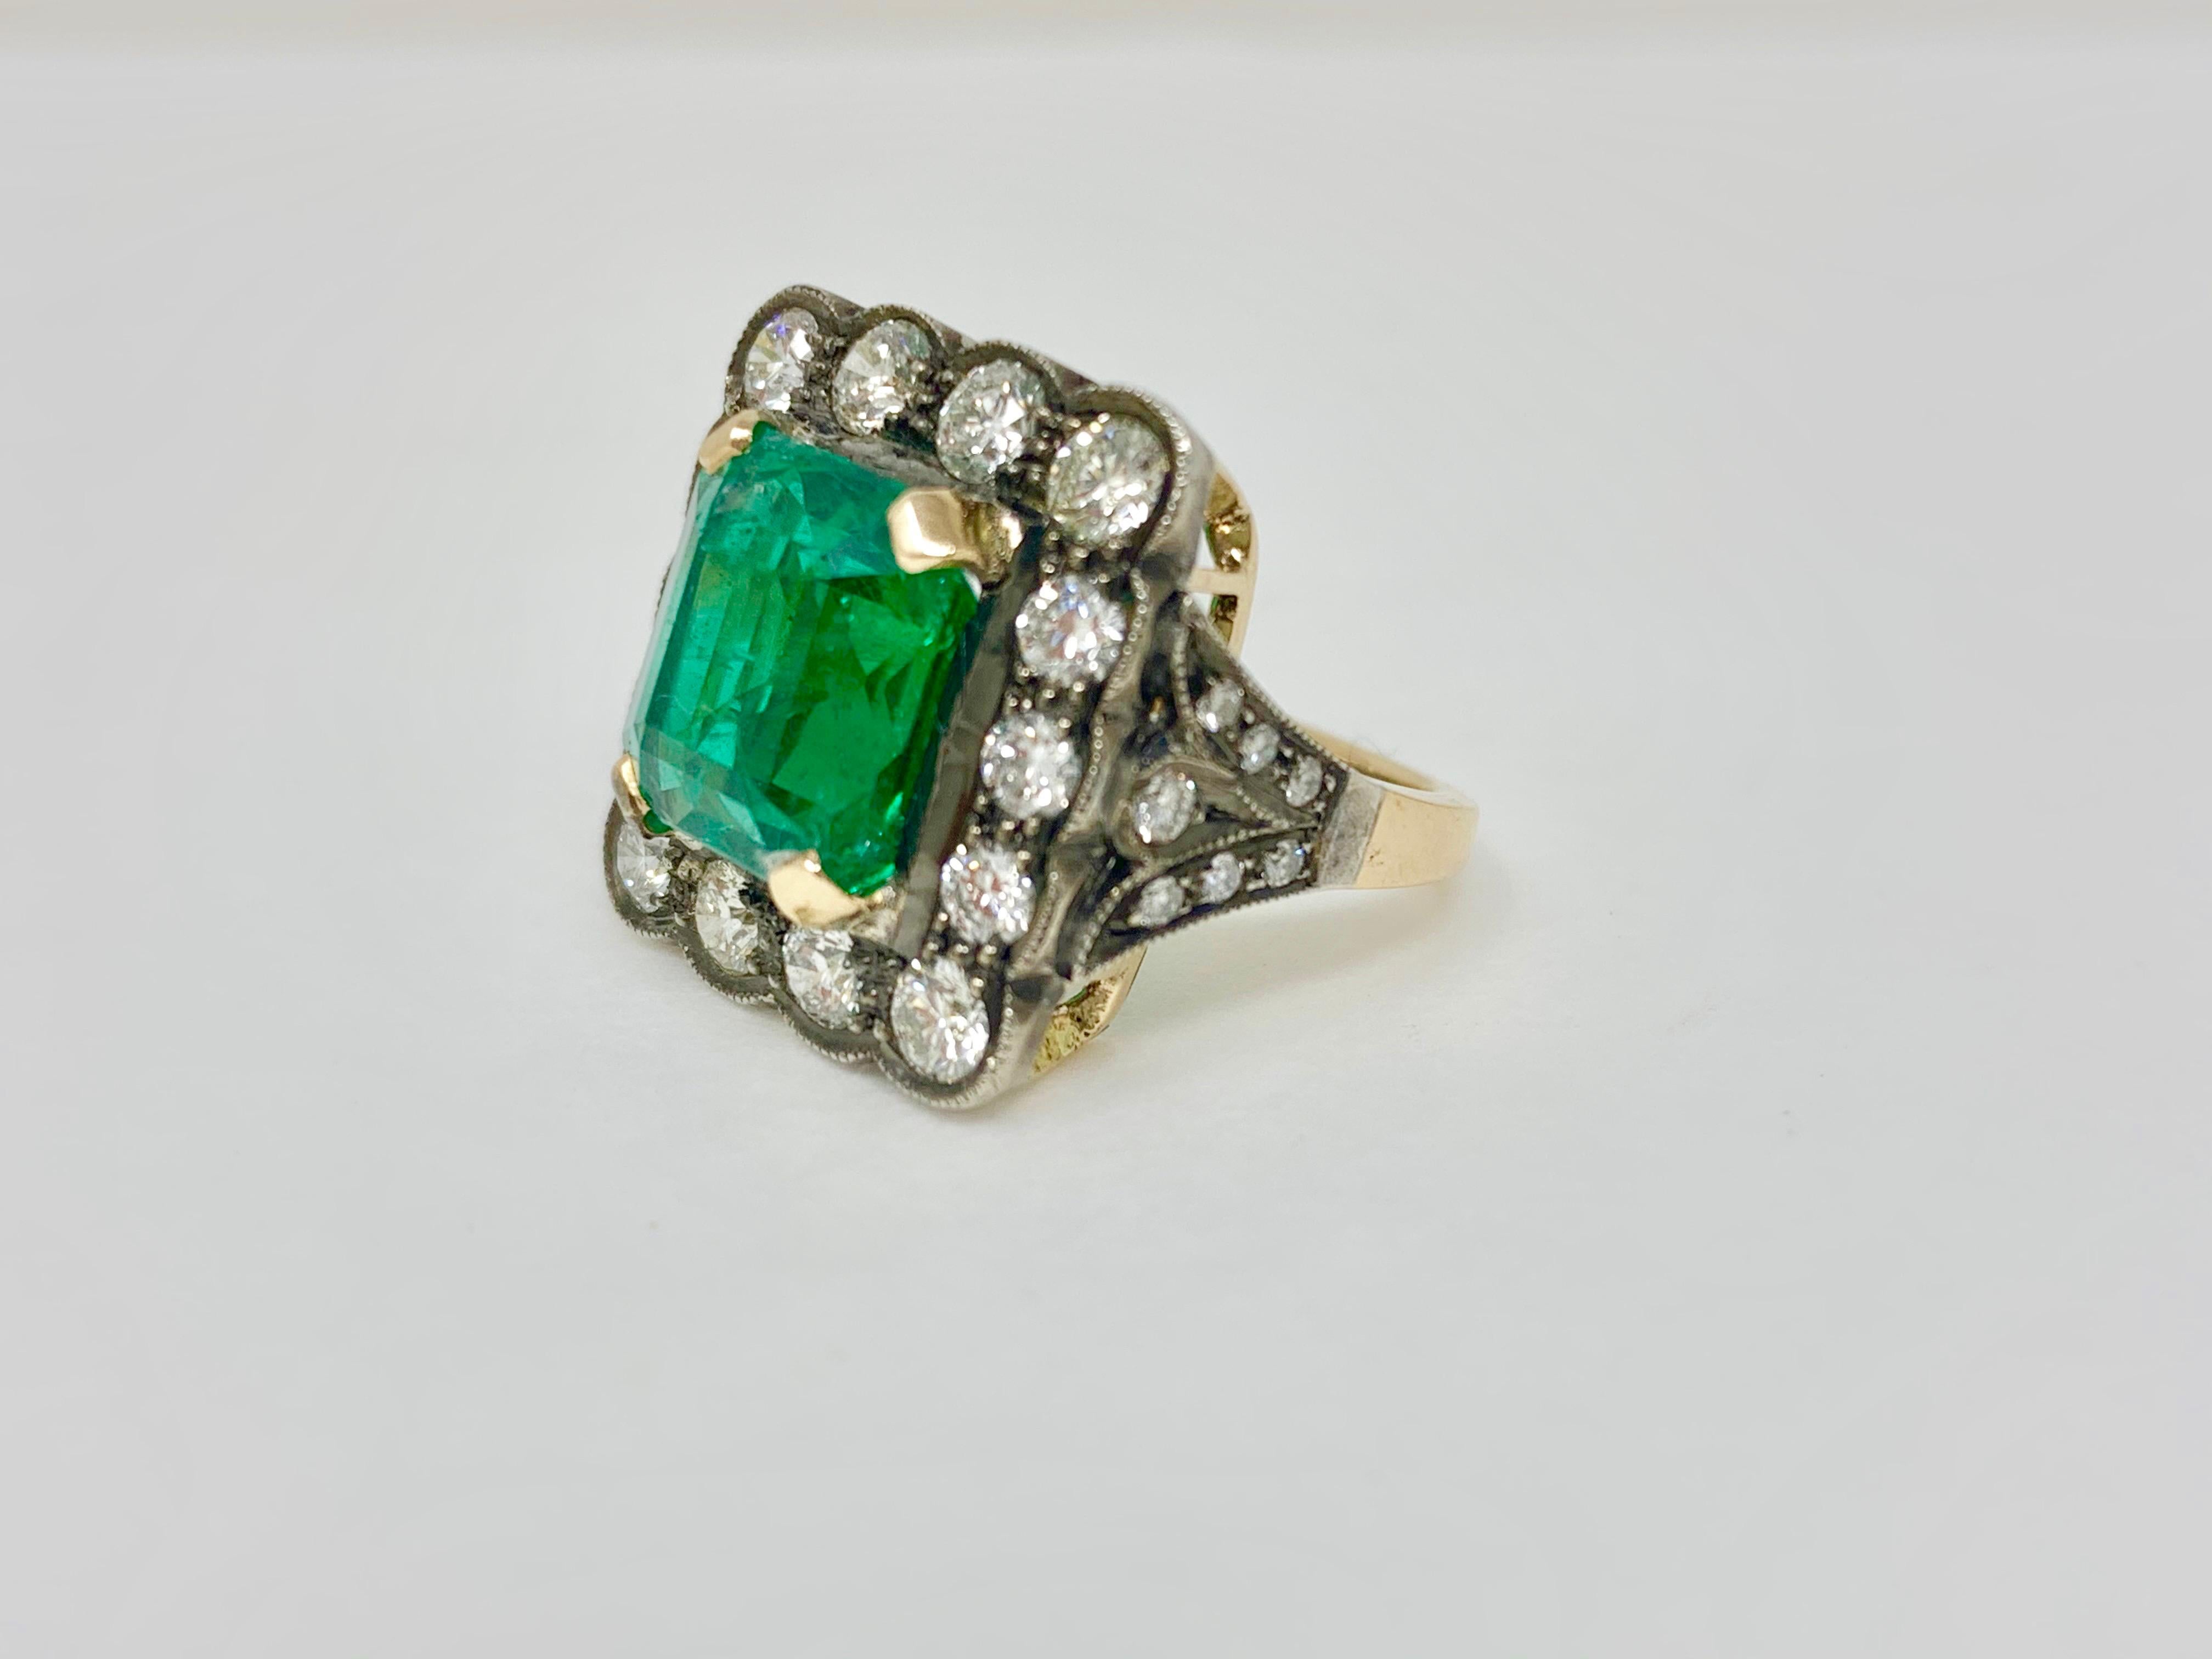 Cushion Cut Antique Style Emerald and Diamond Engagement Ring in 18 Karat Gold